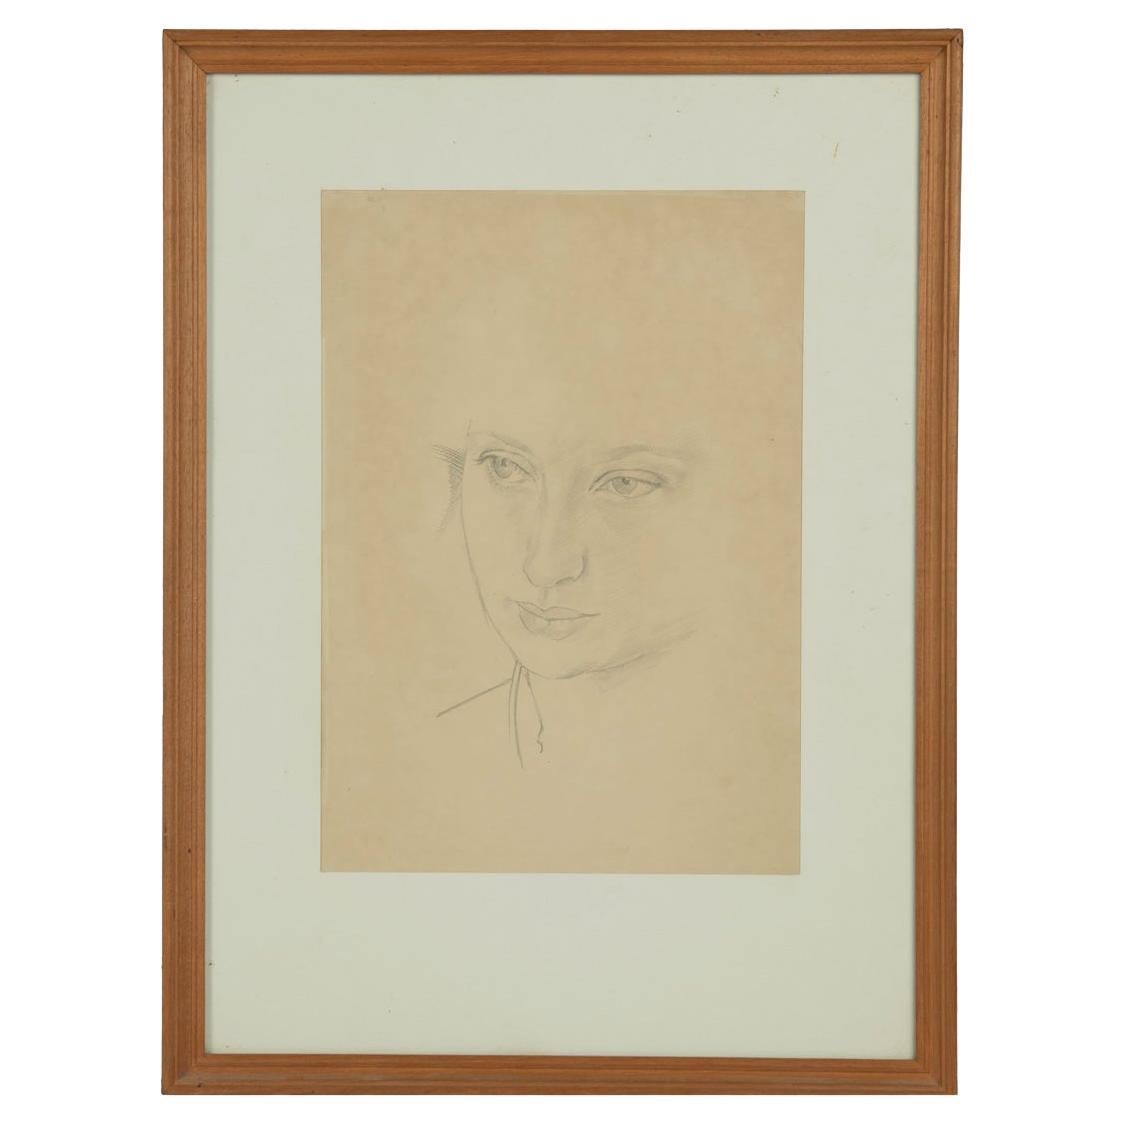 An original portrait drawing by Sir Stanley Spencer of Daphne Spencer, his niece